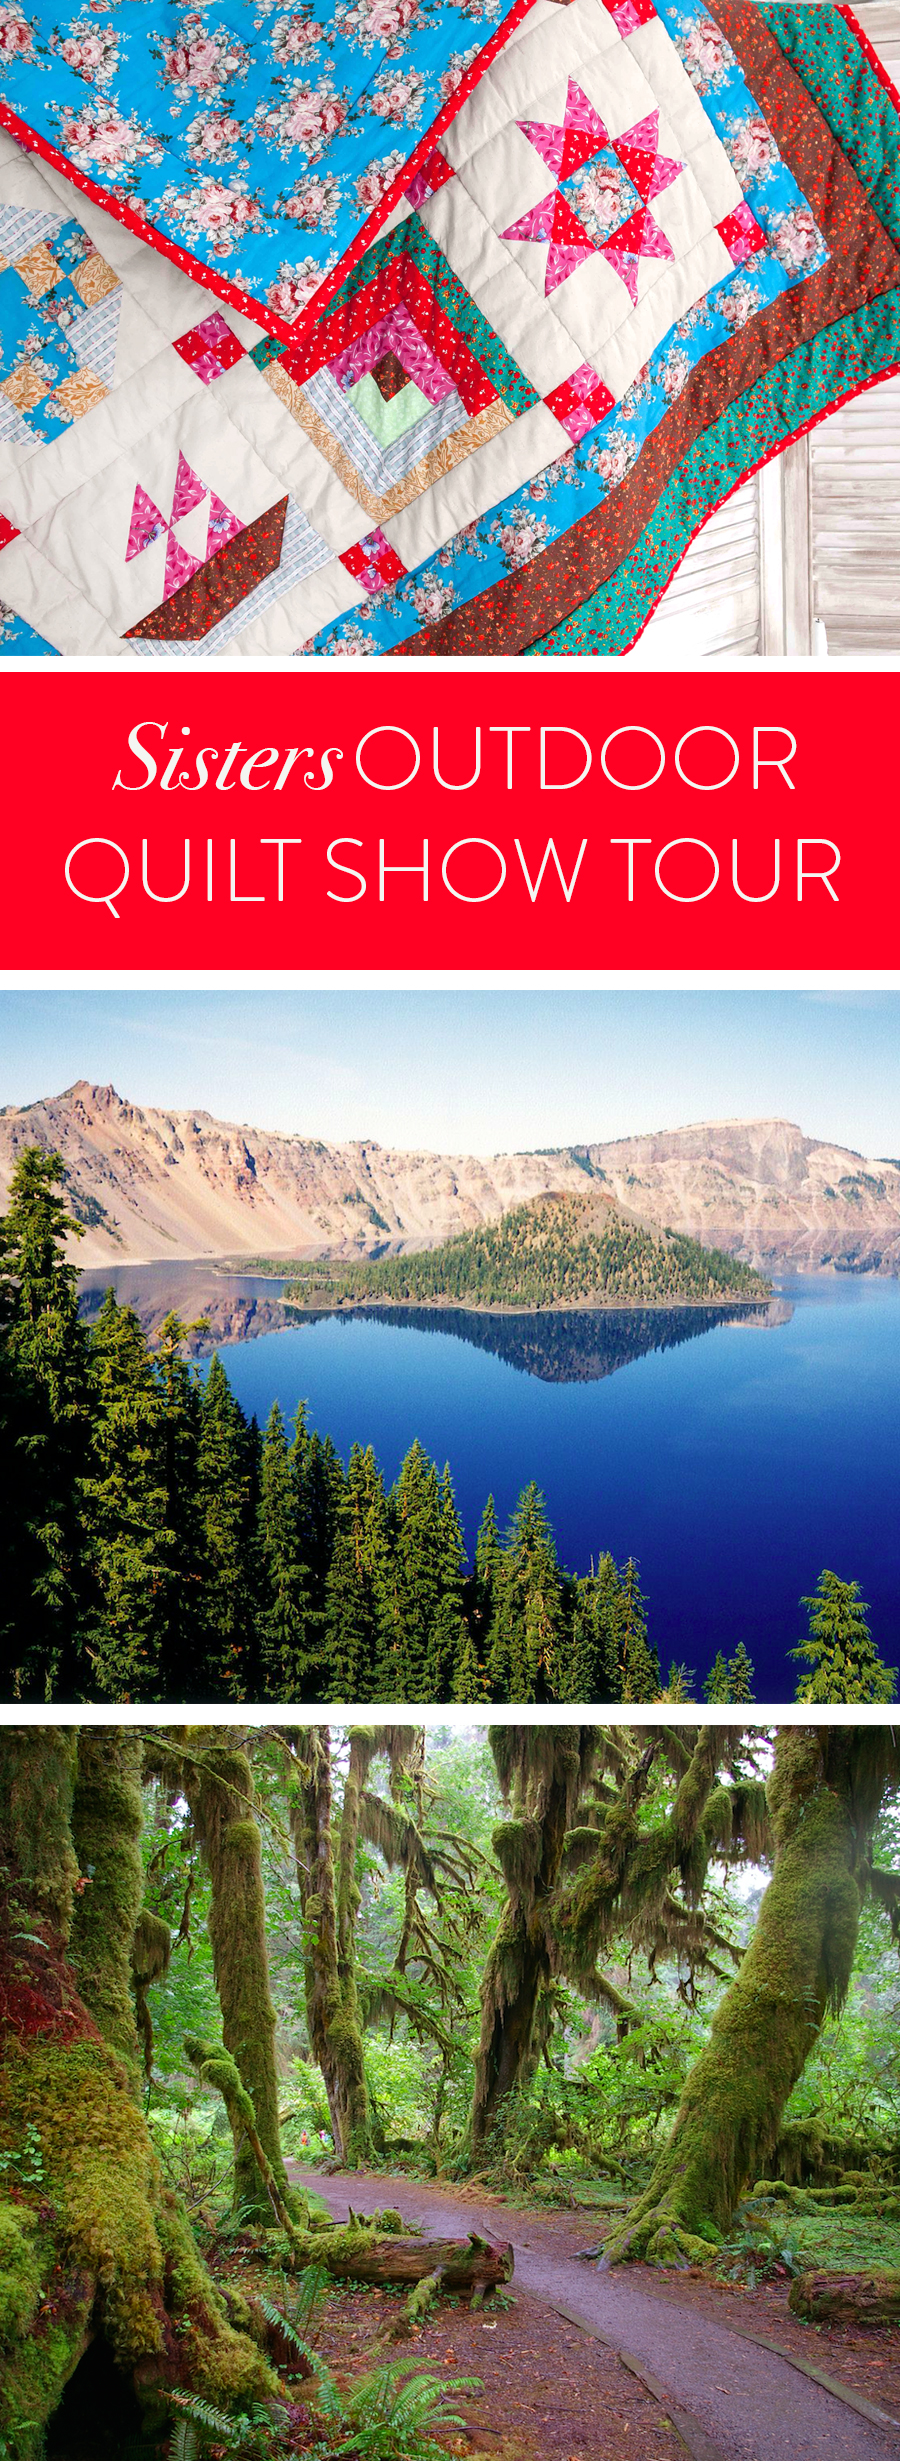 The Sisters Outdoor Quilt Show Guide! | Suzy Quilts https://suzyquilts.com/sisters-outdoor-quit-show